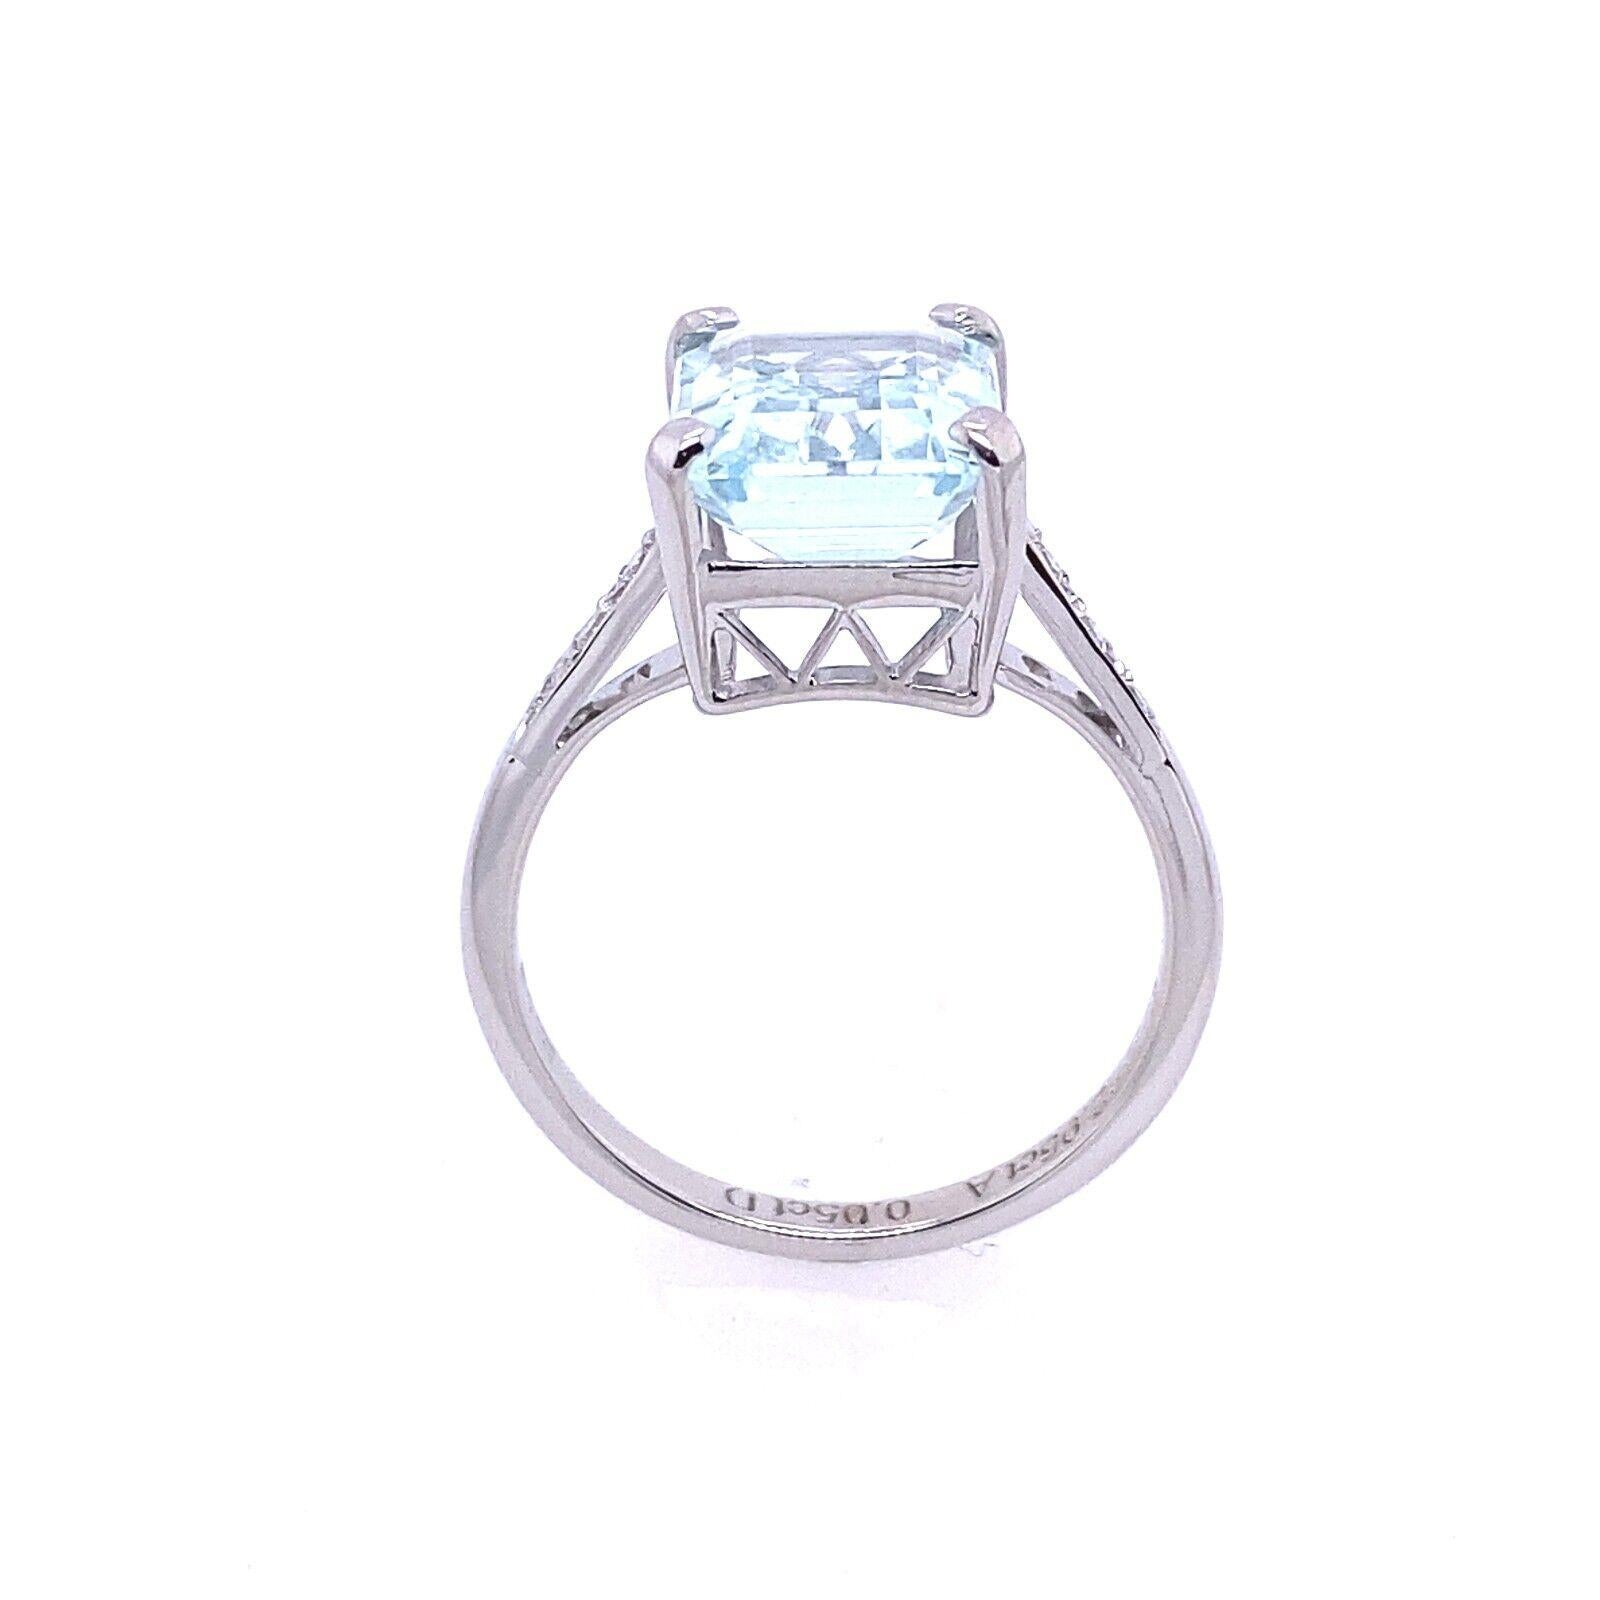 Women's 2.95ct Emerald Cut Aquamarine Set in 18ct White Gold Ring with Diamonds For Sale